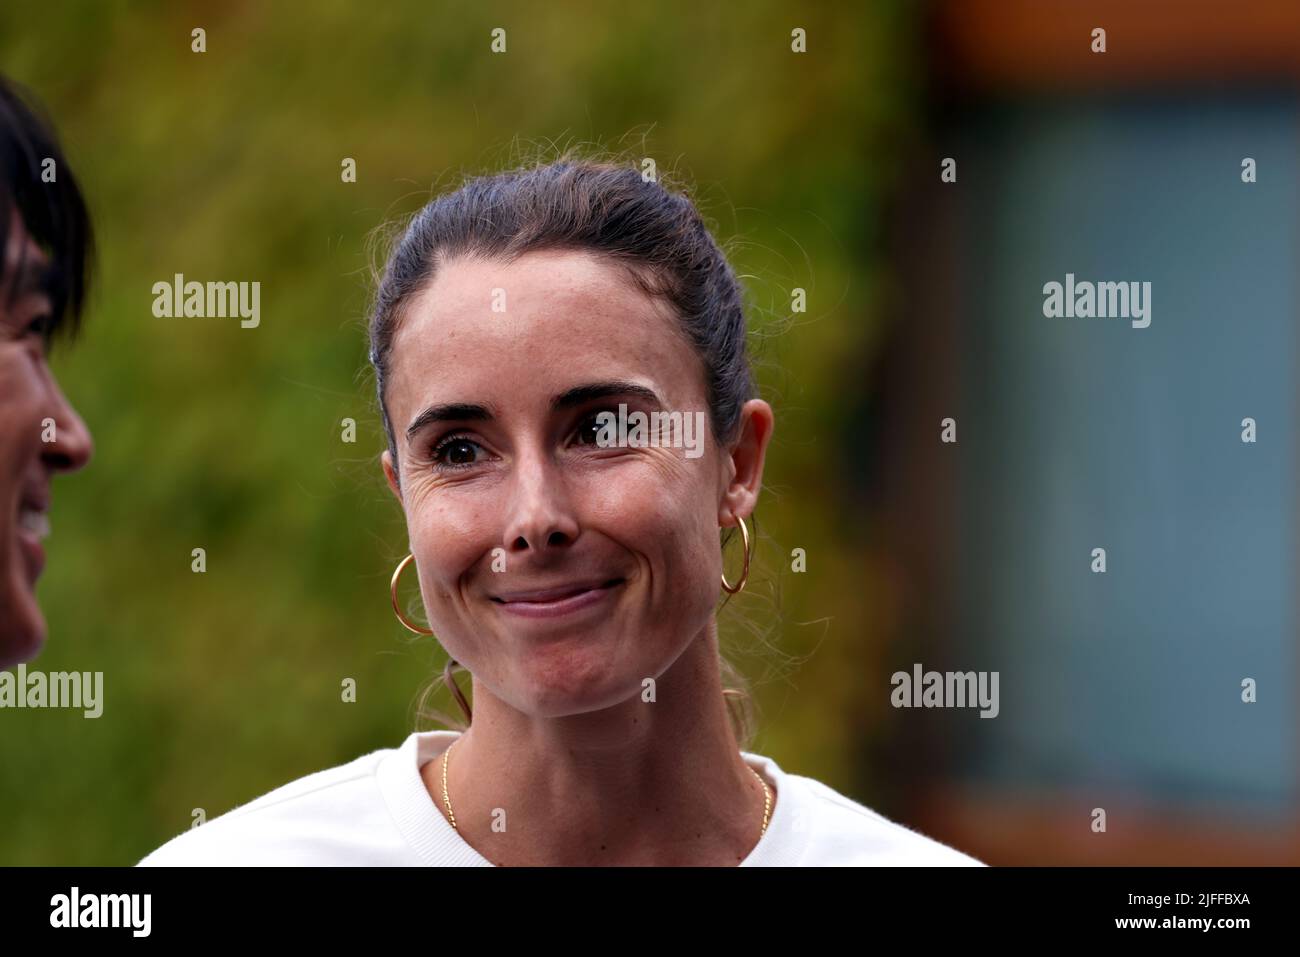 London. Aliz Cornet of, France. 2nd July, 2022. conducting an interview shortly after defeating number one seed Iga Swiatek in the third round at Wimbledon today. Credit: Adam Stoltman/Alamy Live News Stock Photo